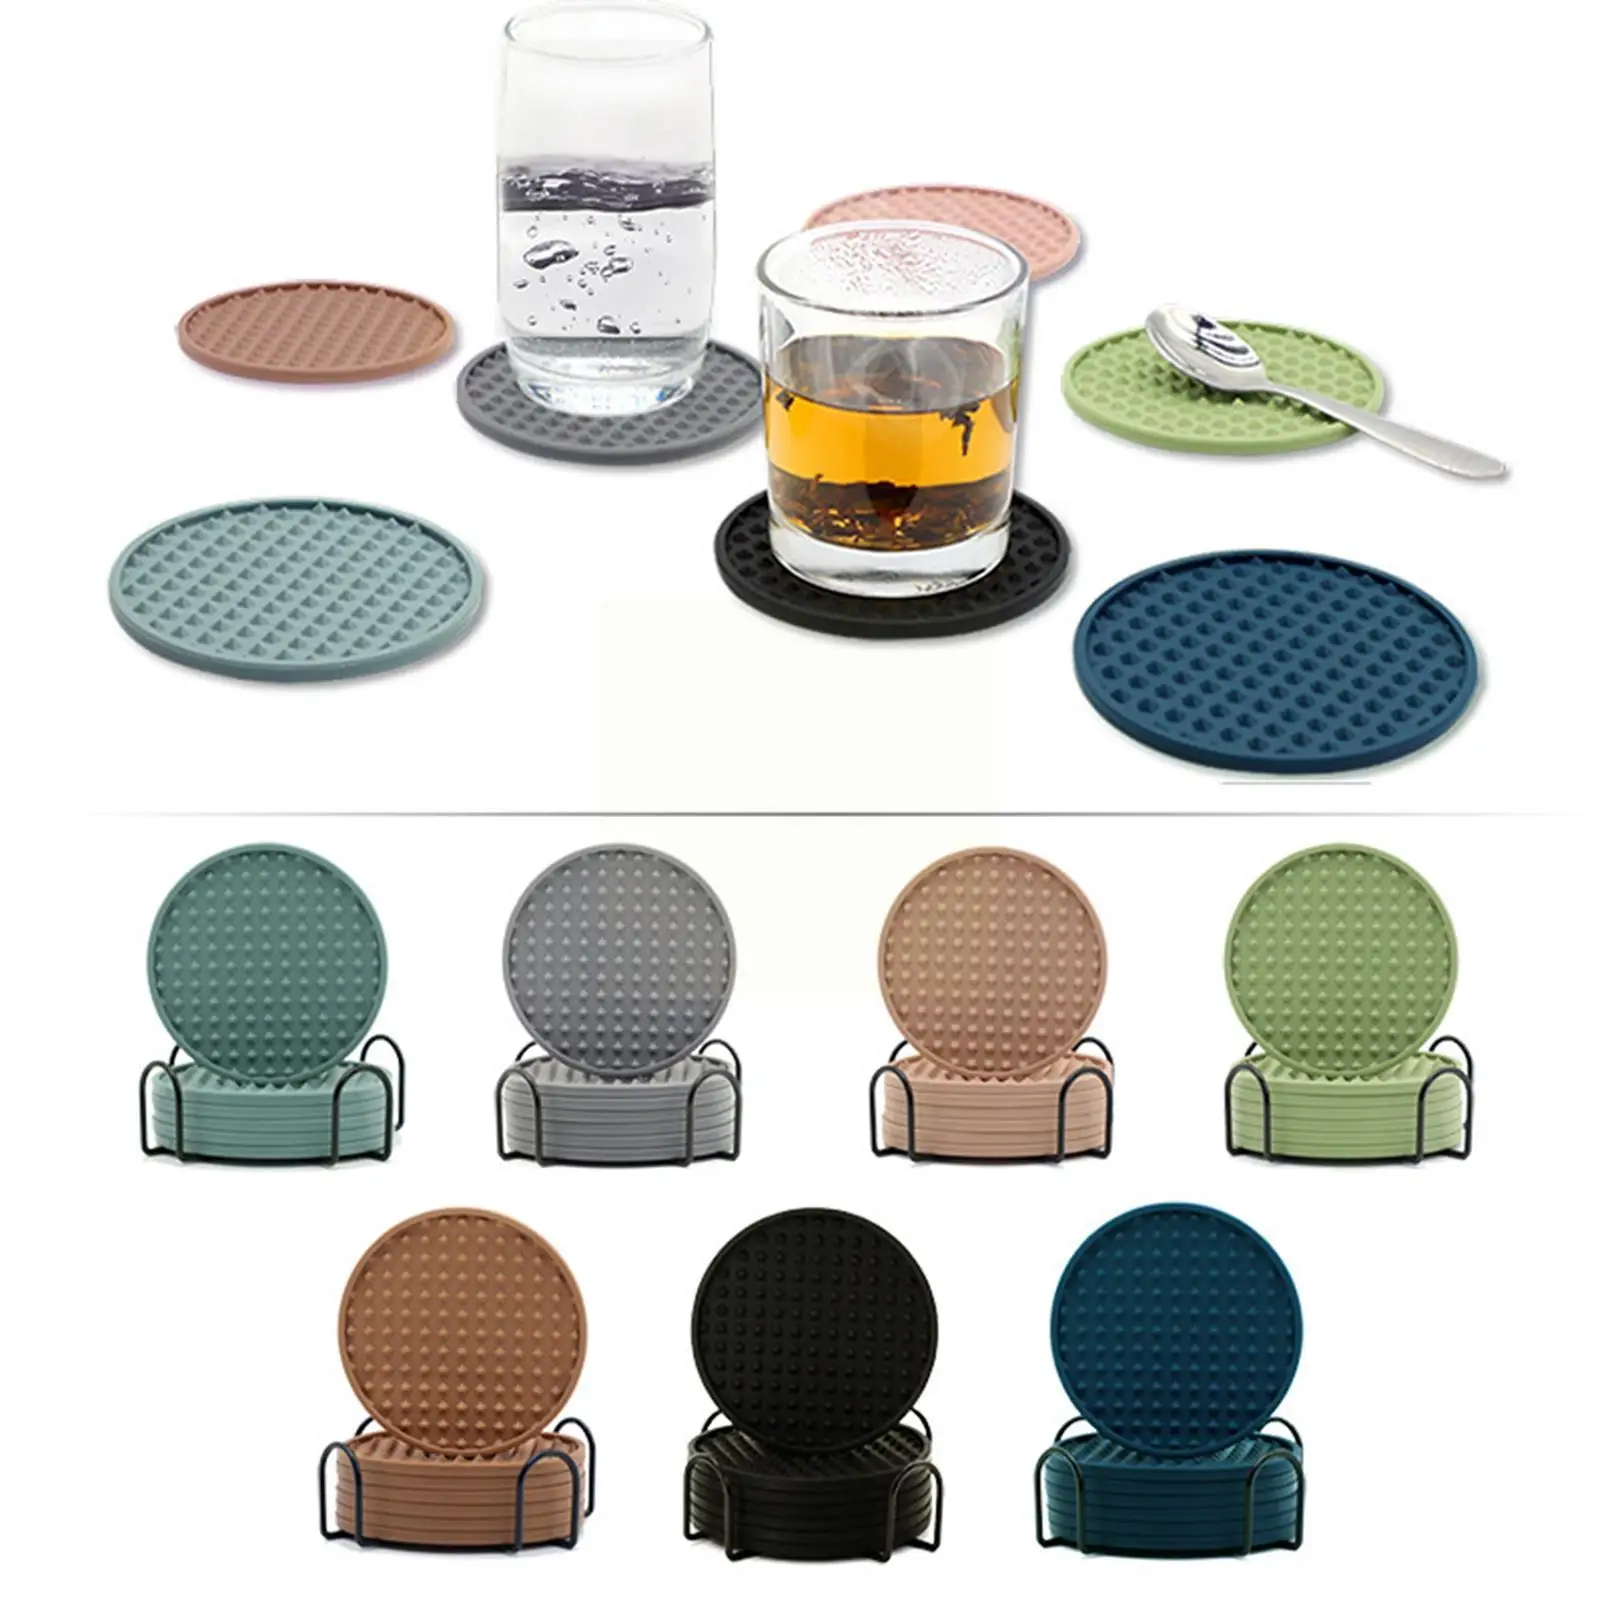 

10cm Round Silicone Table Mat Extra Thick Placemat Honeycomb Holder Cans Pot Kitchen Hot Open Creative Coffee Coaster Cup P M0F1